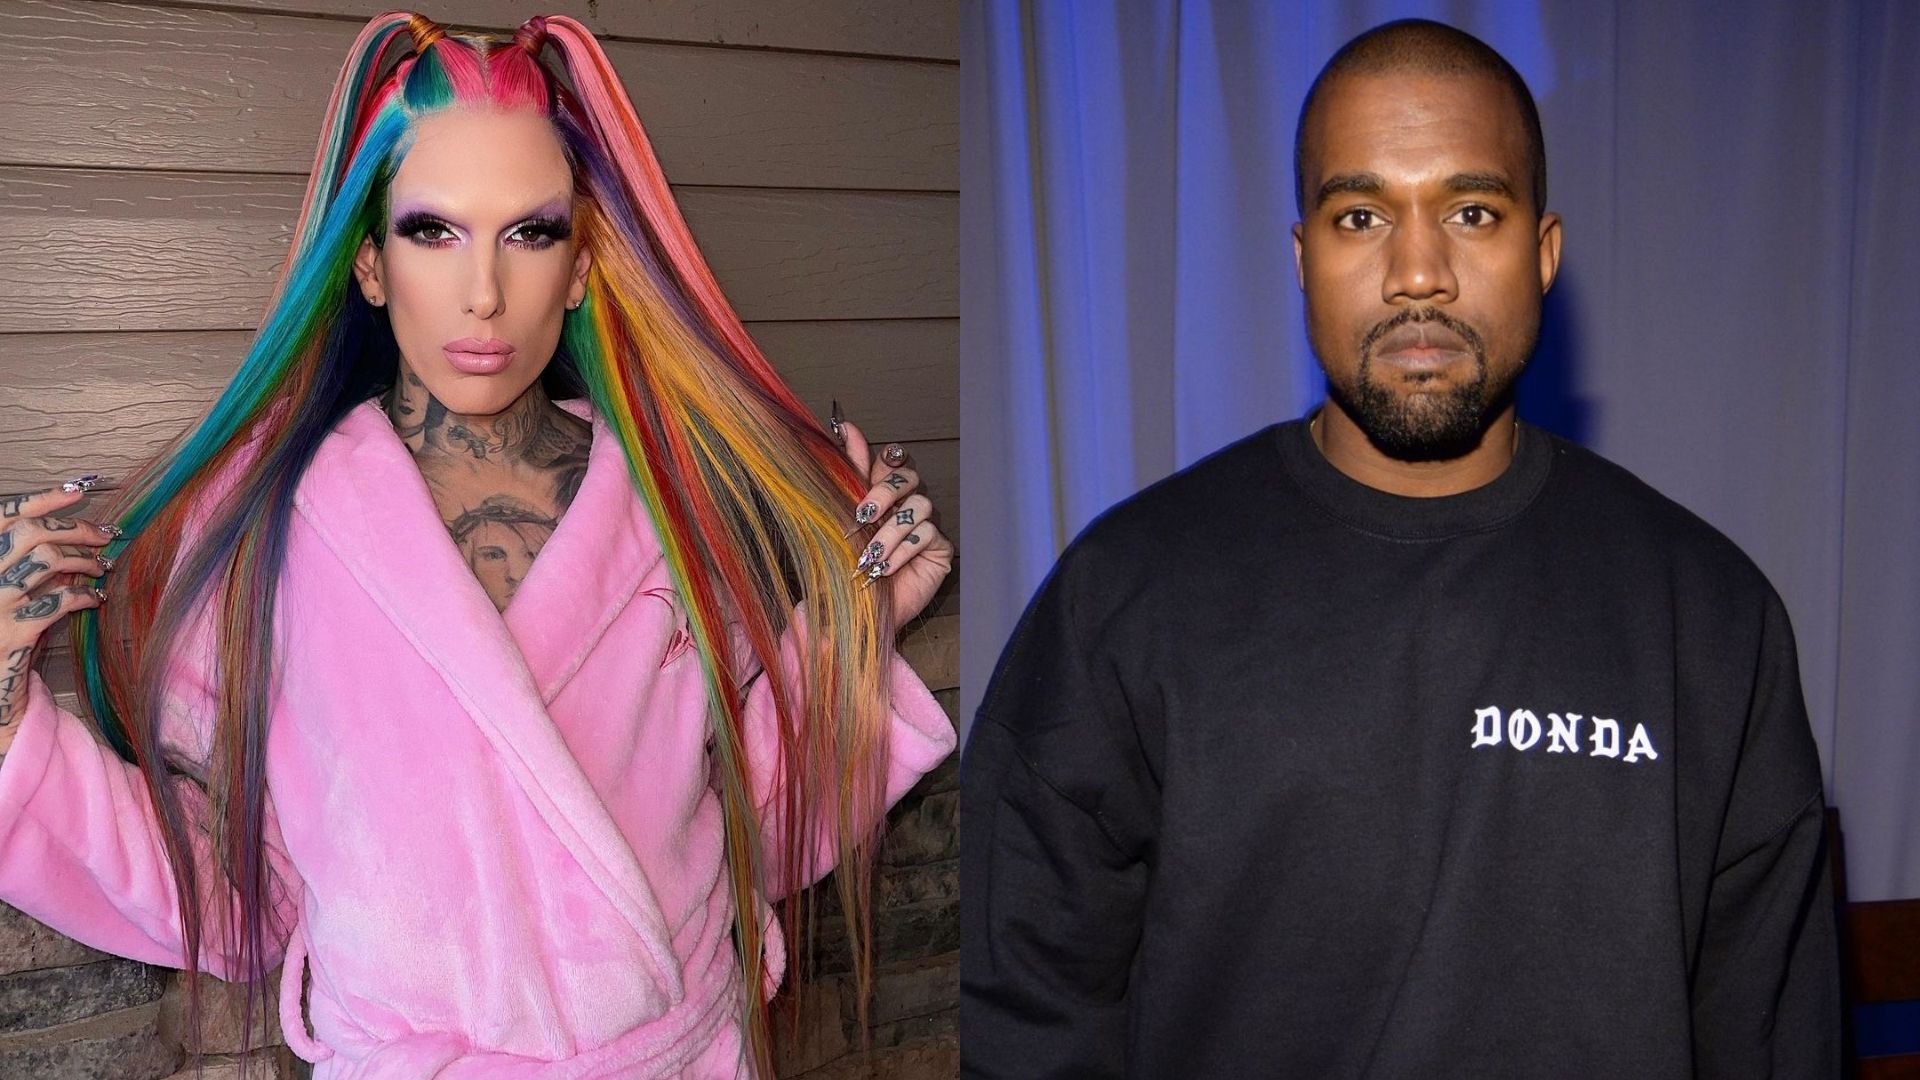 The Internet is convinced that Jeffree Star and Kanye West are an item ...